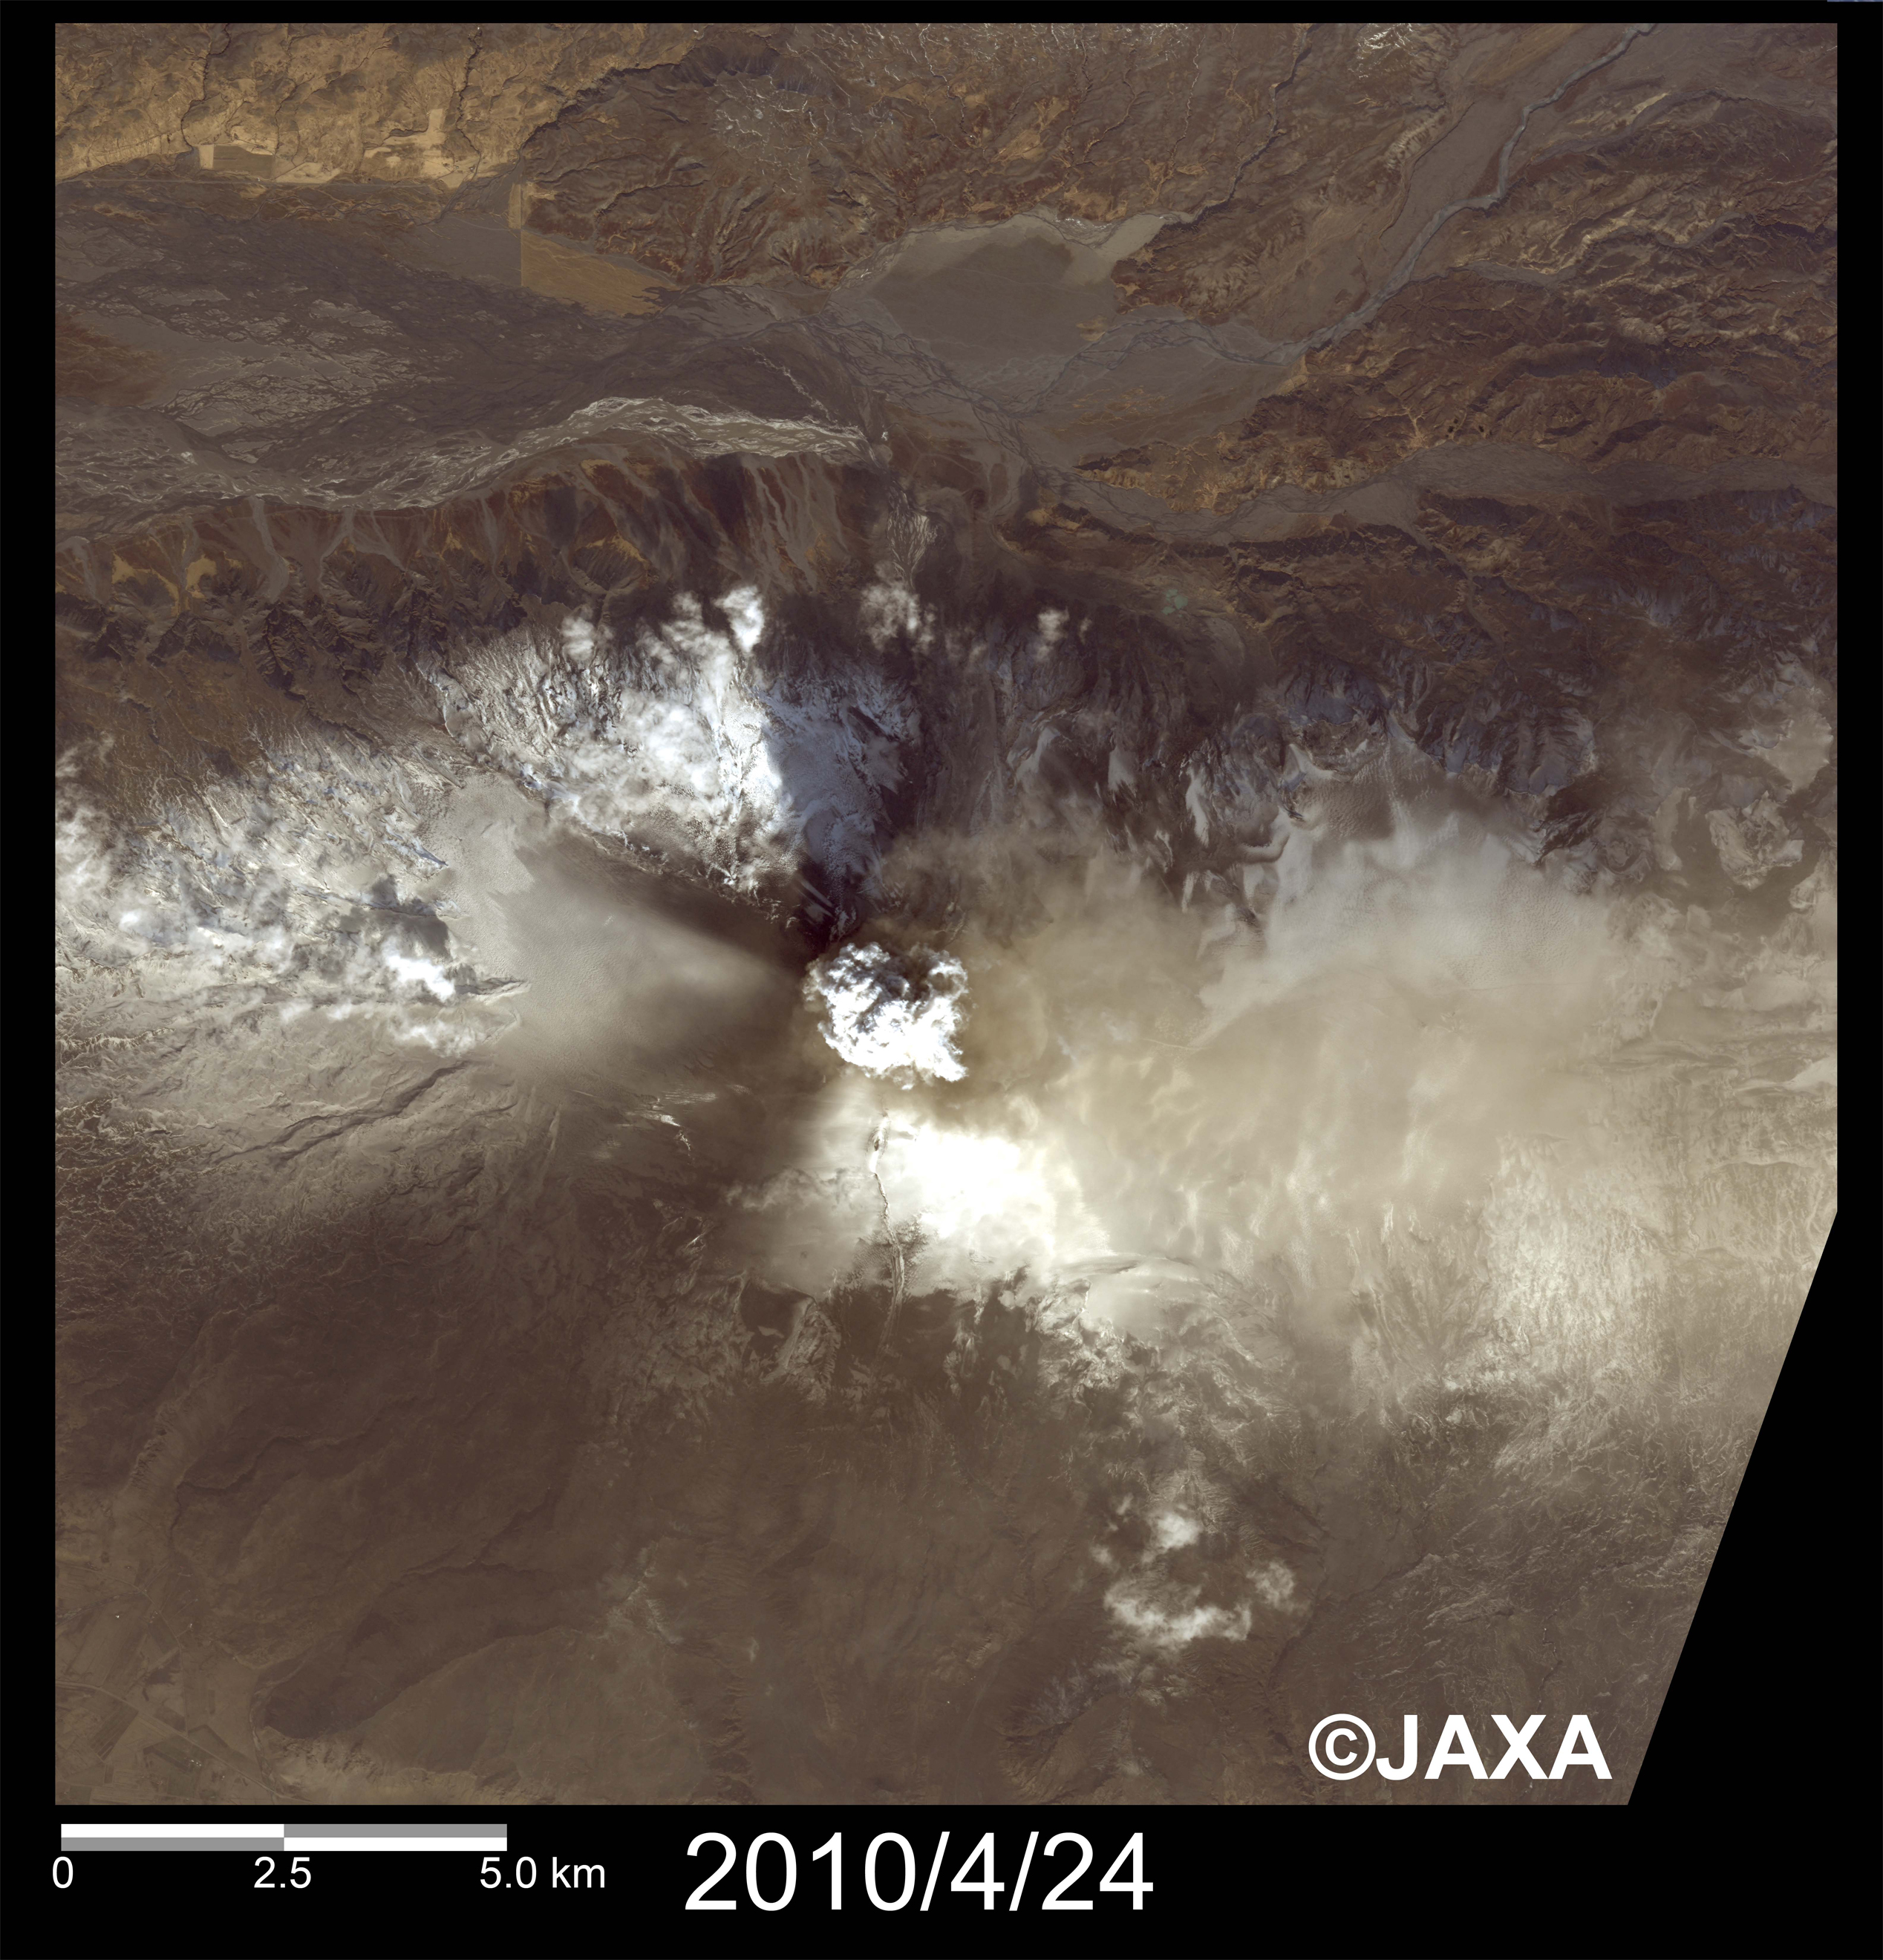 Fig.2: Enlaged images around the crater of the Eyjafjallajökull volcano